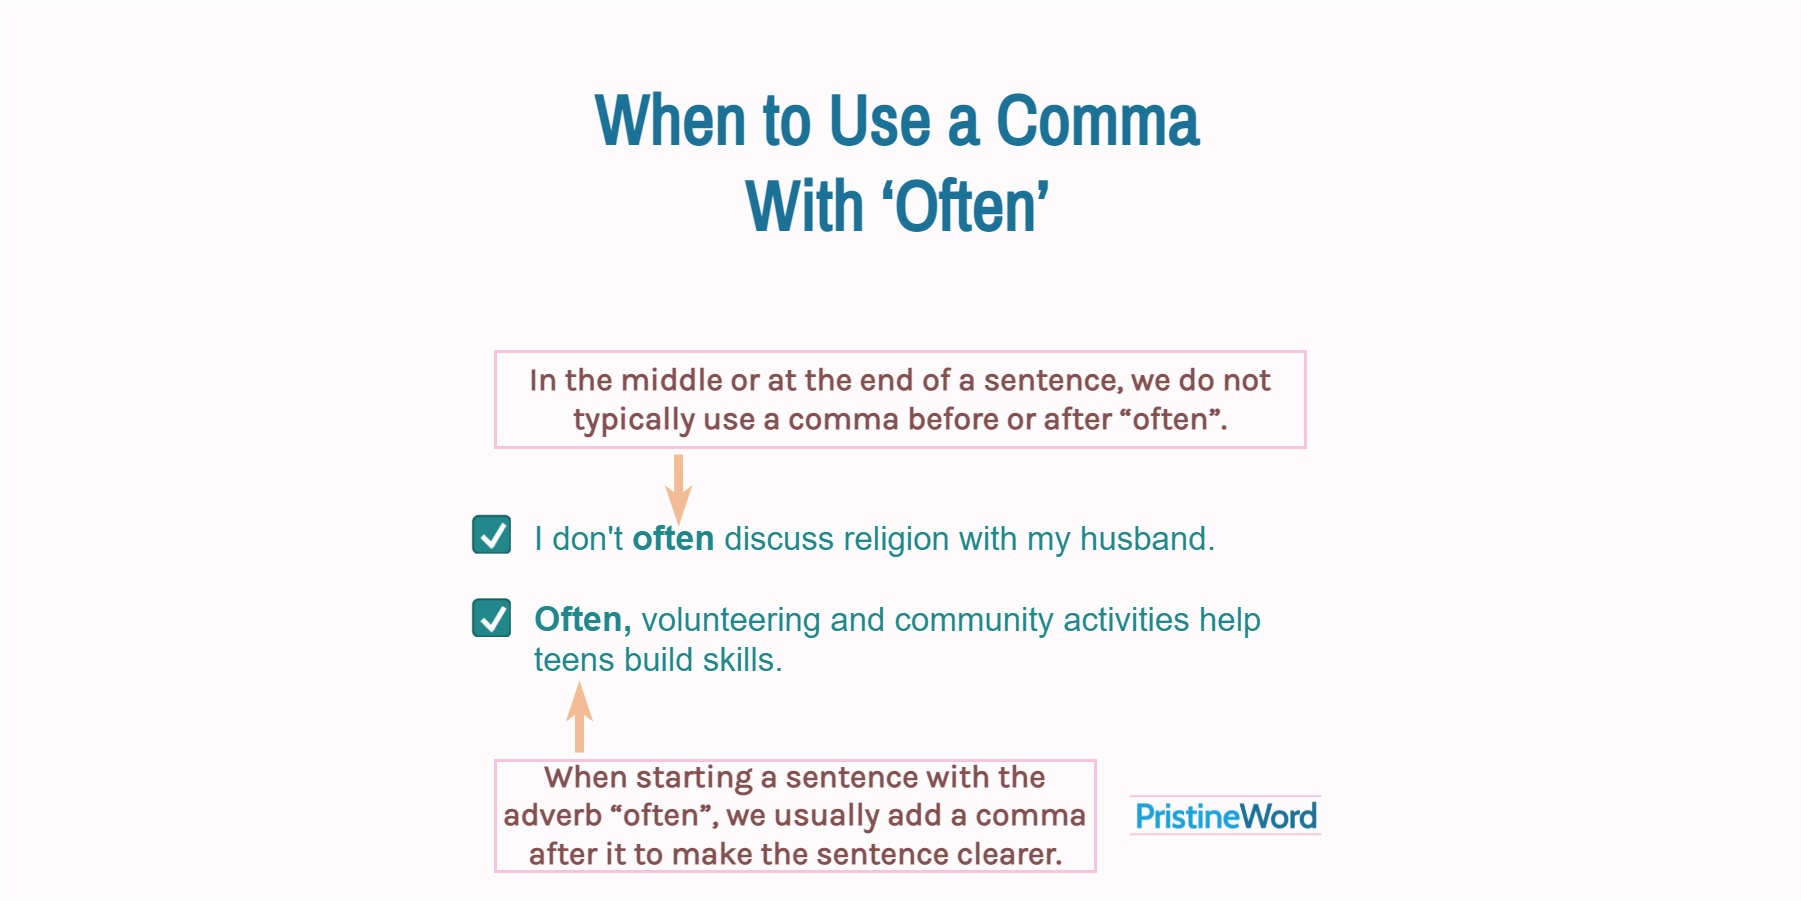 When to Use Commas With 'Often'